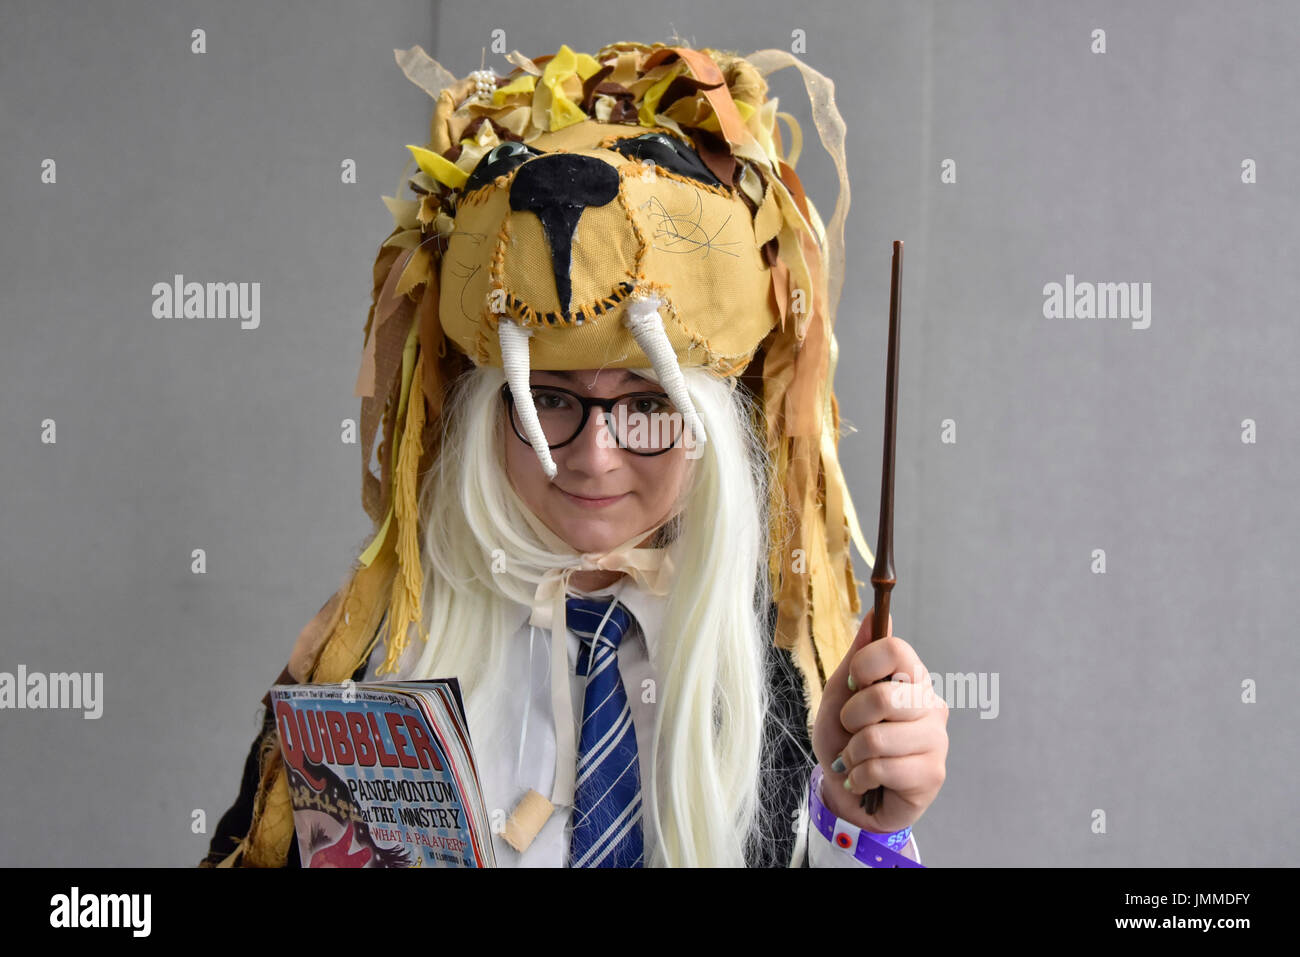 London, UK.  28 July 2017.  A girl dressed as Luna Lovegood from Harry Potter.  Visitors attend the popular London Film & Comic Con convention at Kensington Olympia.   The three day event celebrates film, comics and more providing many with the chance to dress as their favourite characters. Credit: Stephen Chung / Alamy Live News Stock Photo